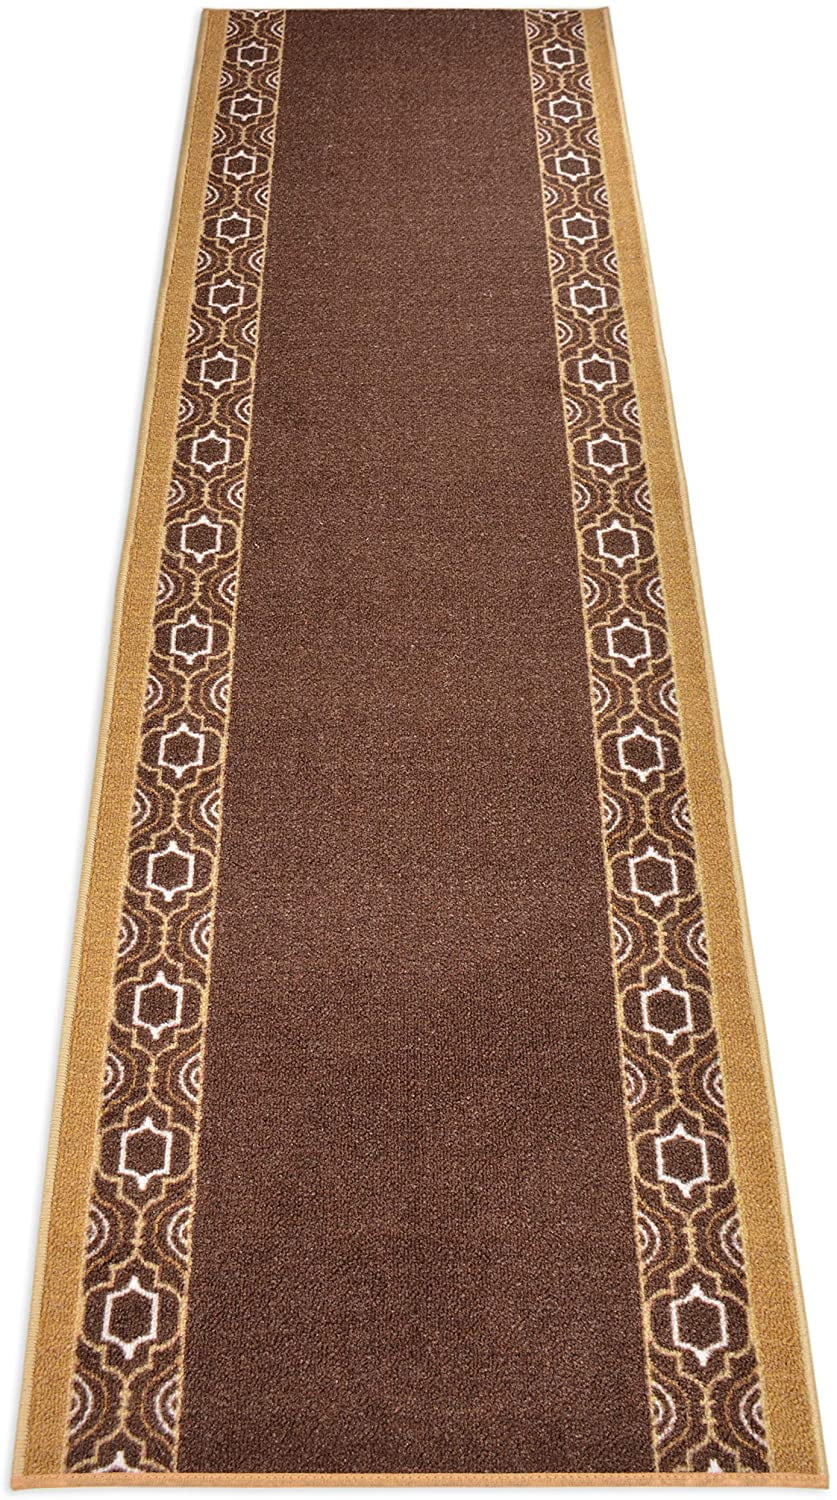 Details about   Custom Size Runner Rug Abstract Brown Beige Skid Resistant Rugs By Feet 26" W 